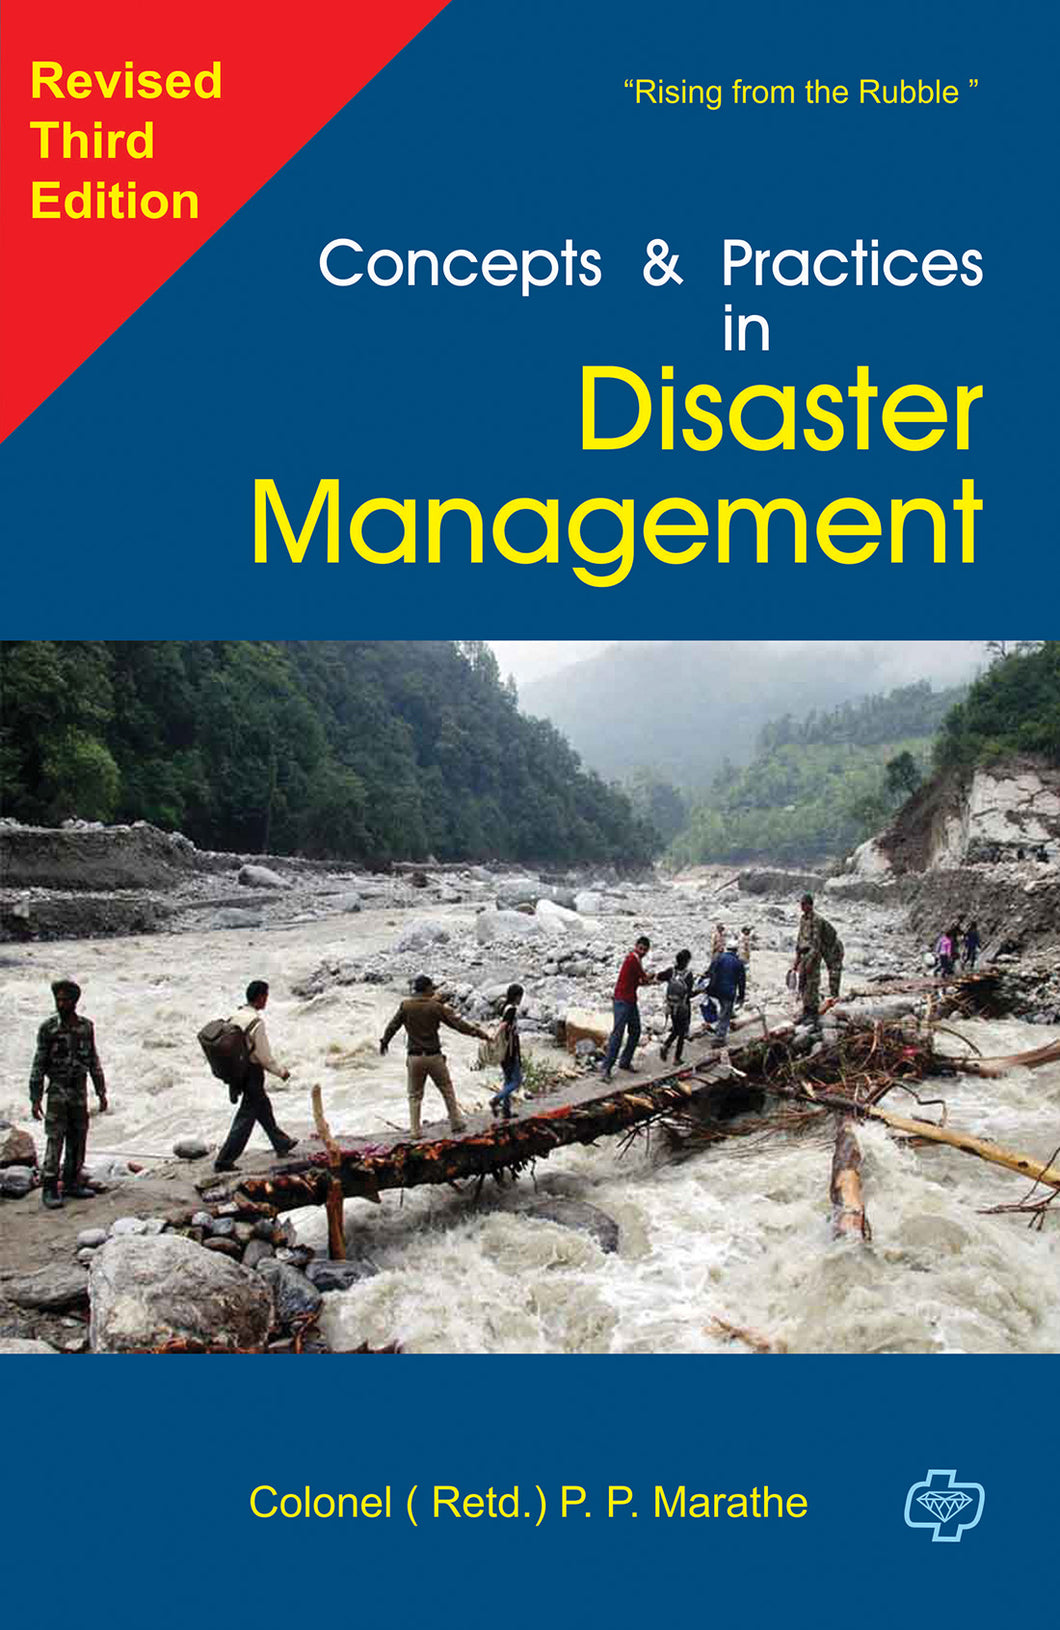 Concepts and practices in Disaster Management